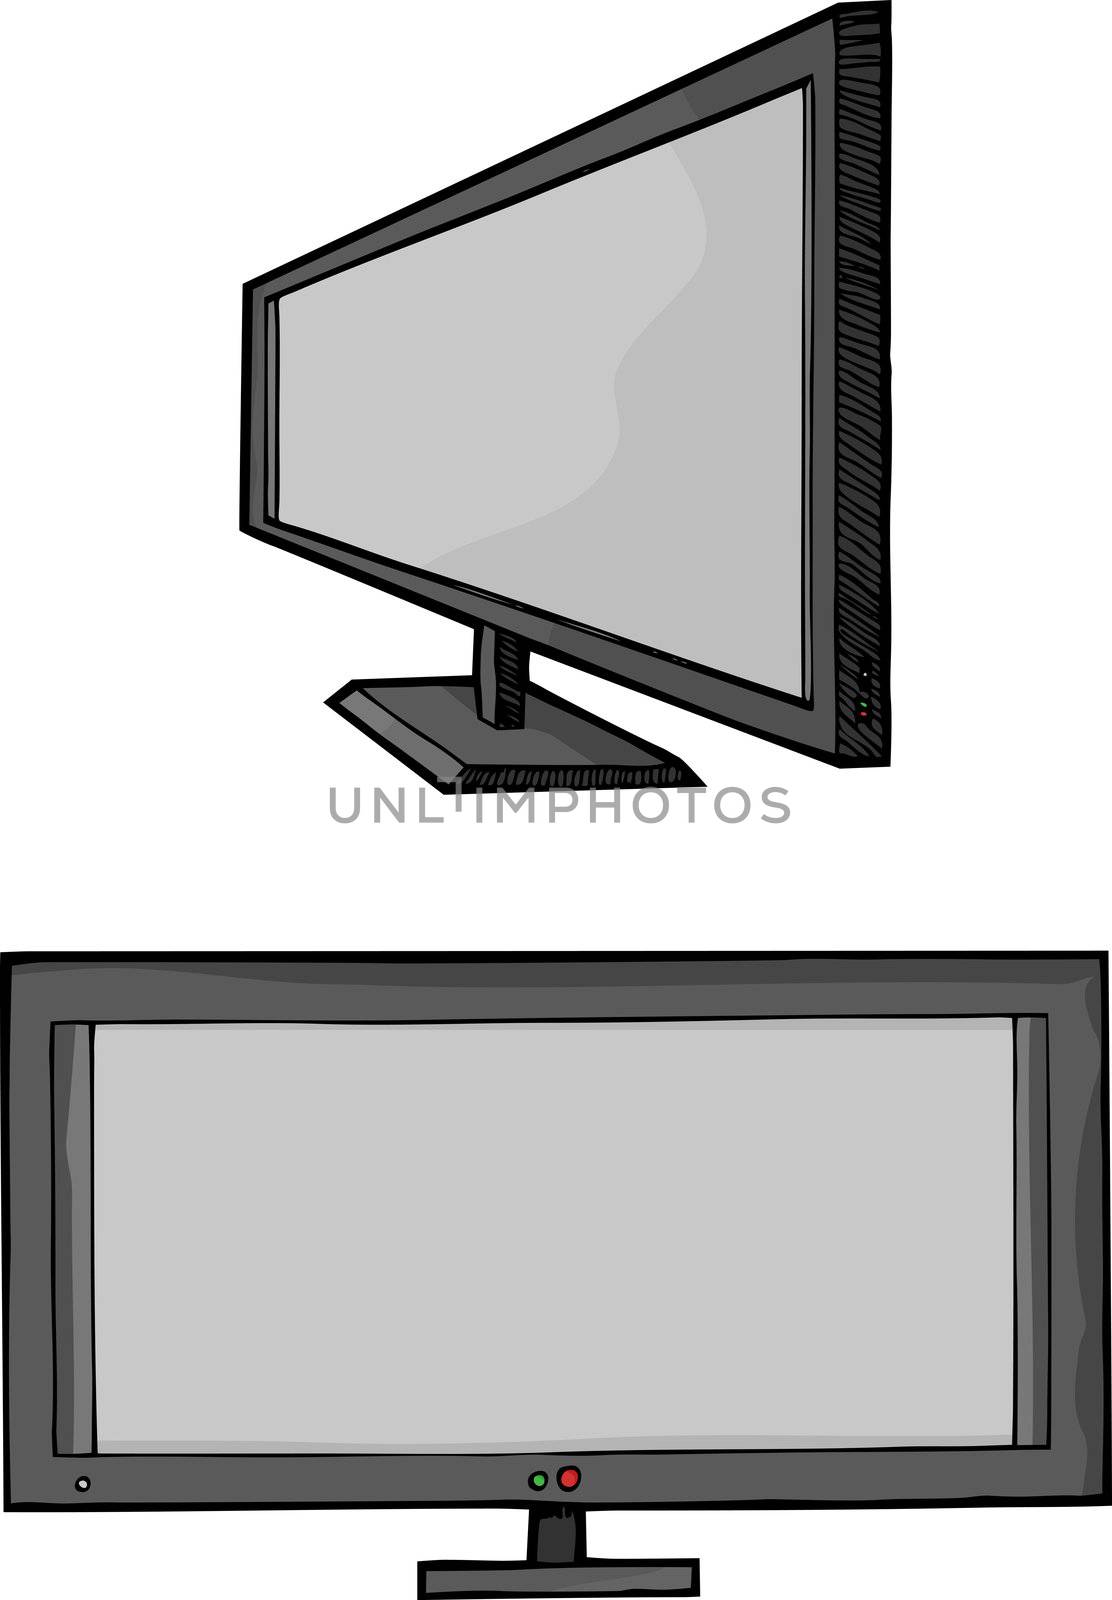 Isolated cartoon of a widescreen flat panel HD television monitor